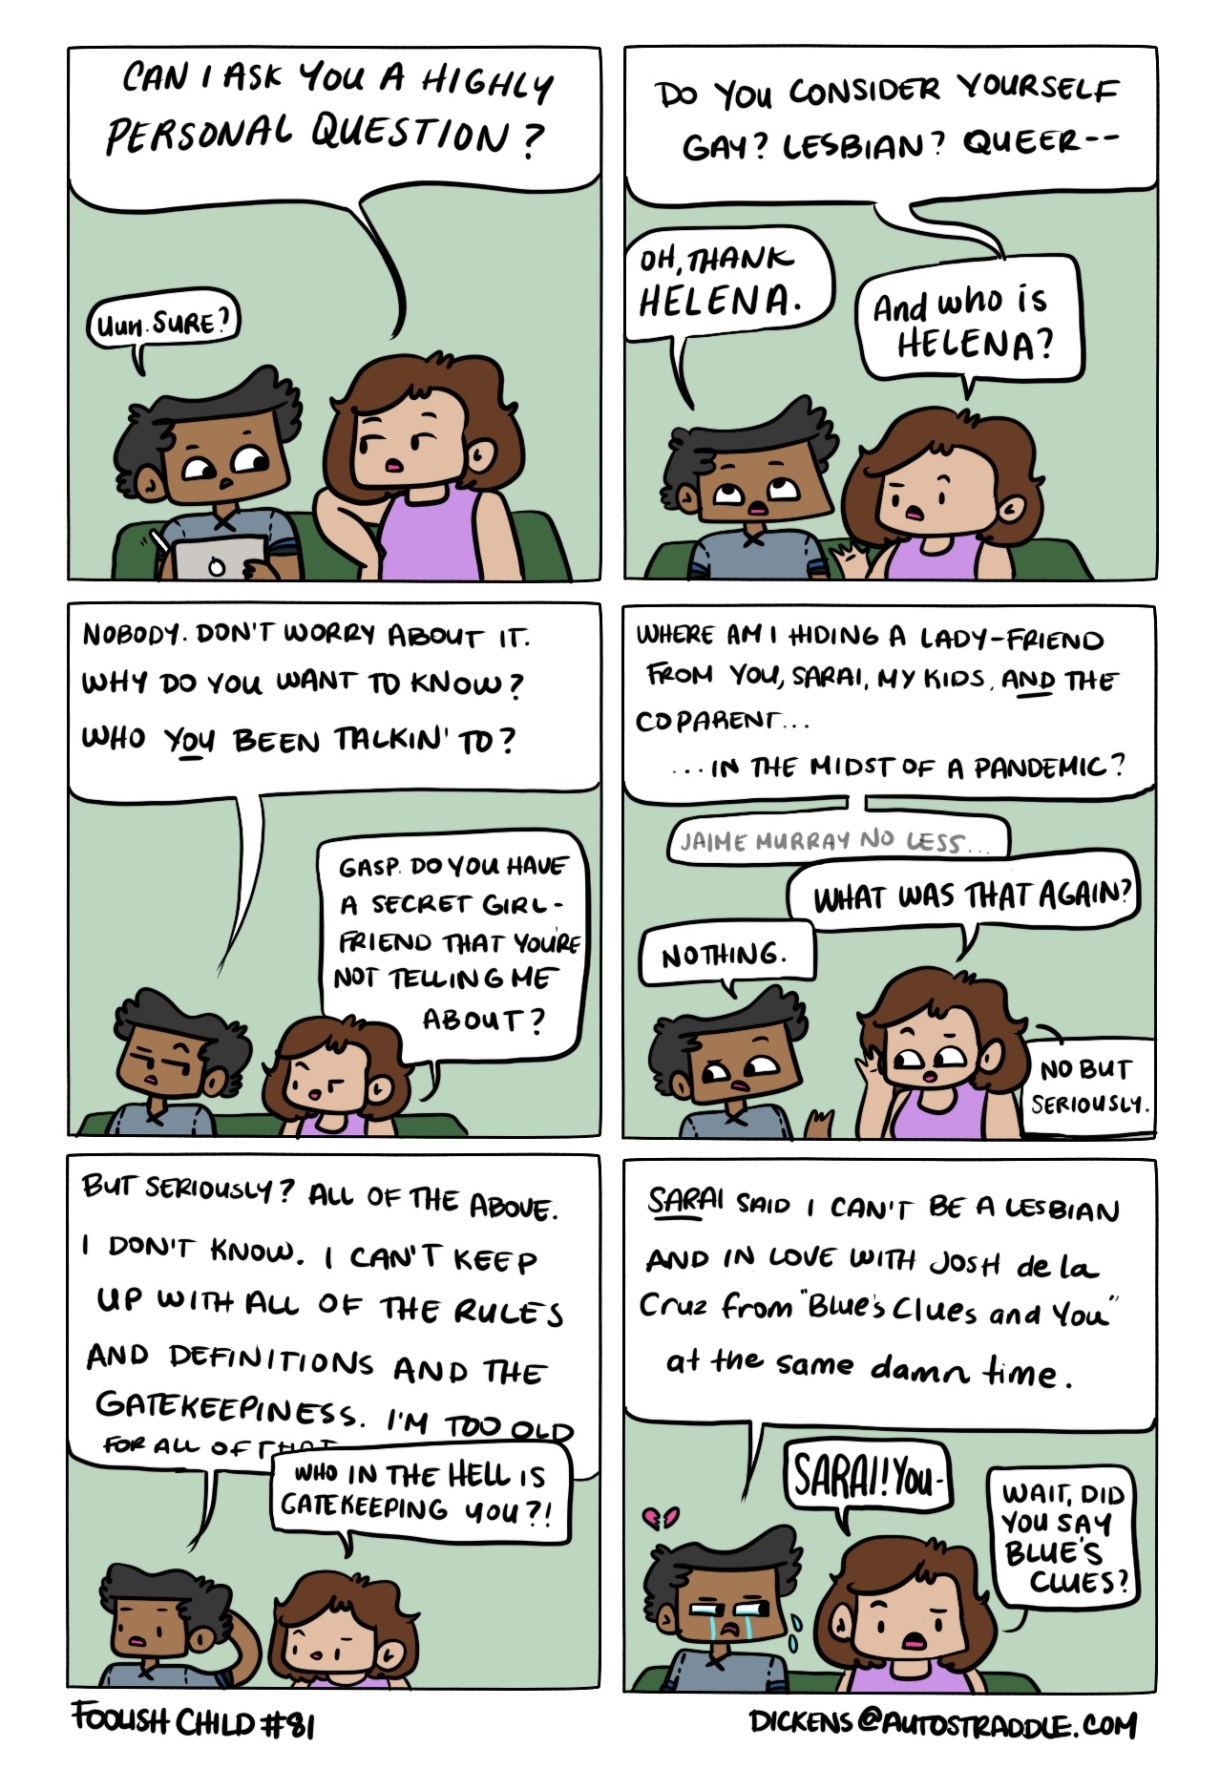 In a six-panel drawn comic, Dickens and a friend sit together on a couch against a green background. The friend asks Dickens, "Can I ask you a highly personal question? Do you consider yourself gay? lesbian? queer?" In response, Dickens jokes "Oh, Thank Helena" in reference to the TV show Warehouse 13. The friend misunderstands Helena as a real person and that begins a comedy of errors in which the friend thinks Dickens has a secret girlfriend. Finally Dickens admits that they can't keep up with labels anymore — can they be a lesbian and still be in love with Josh de la Cruz from "Blues Clues"?